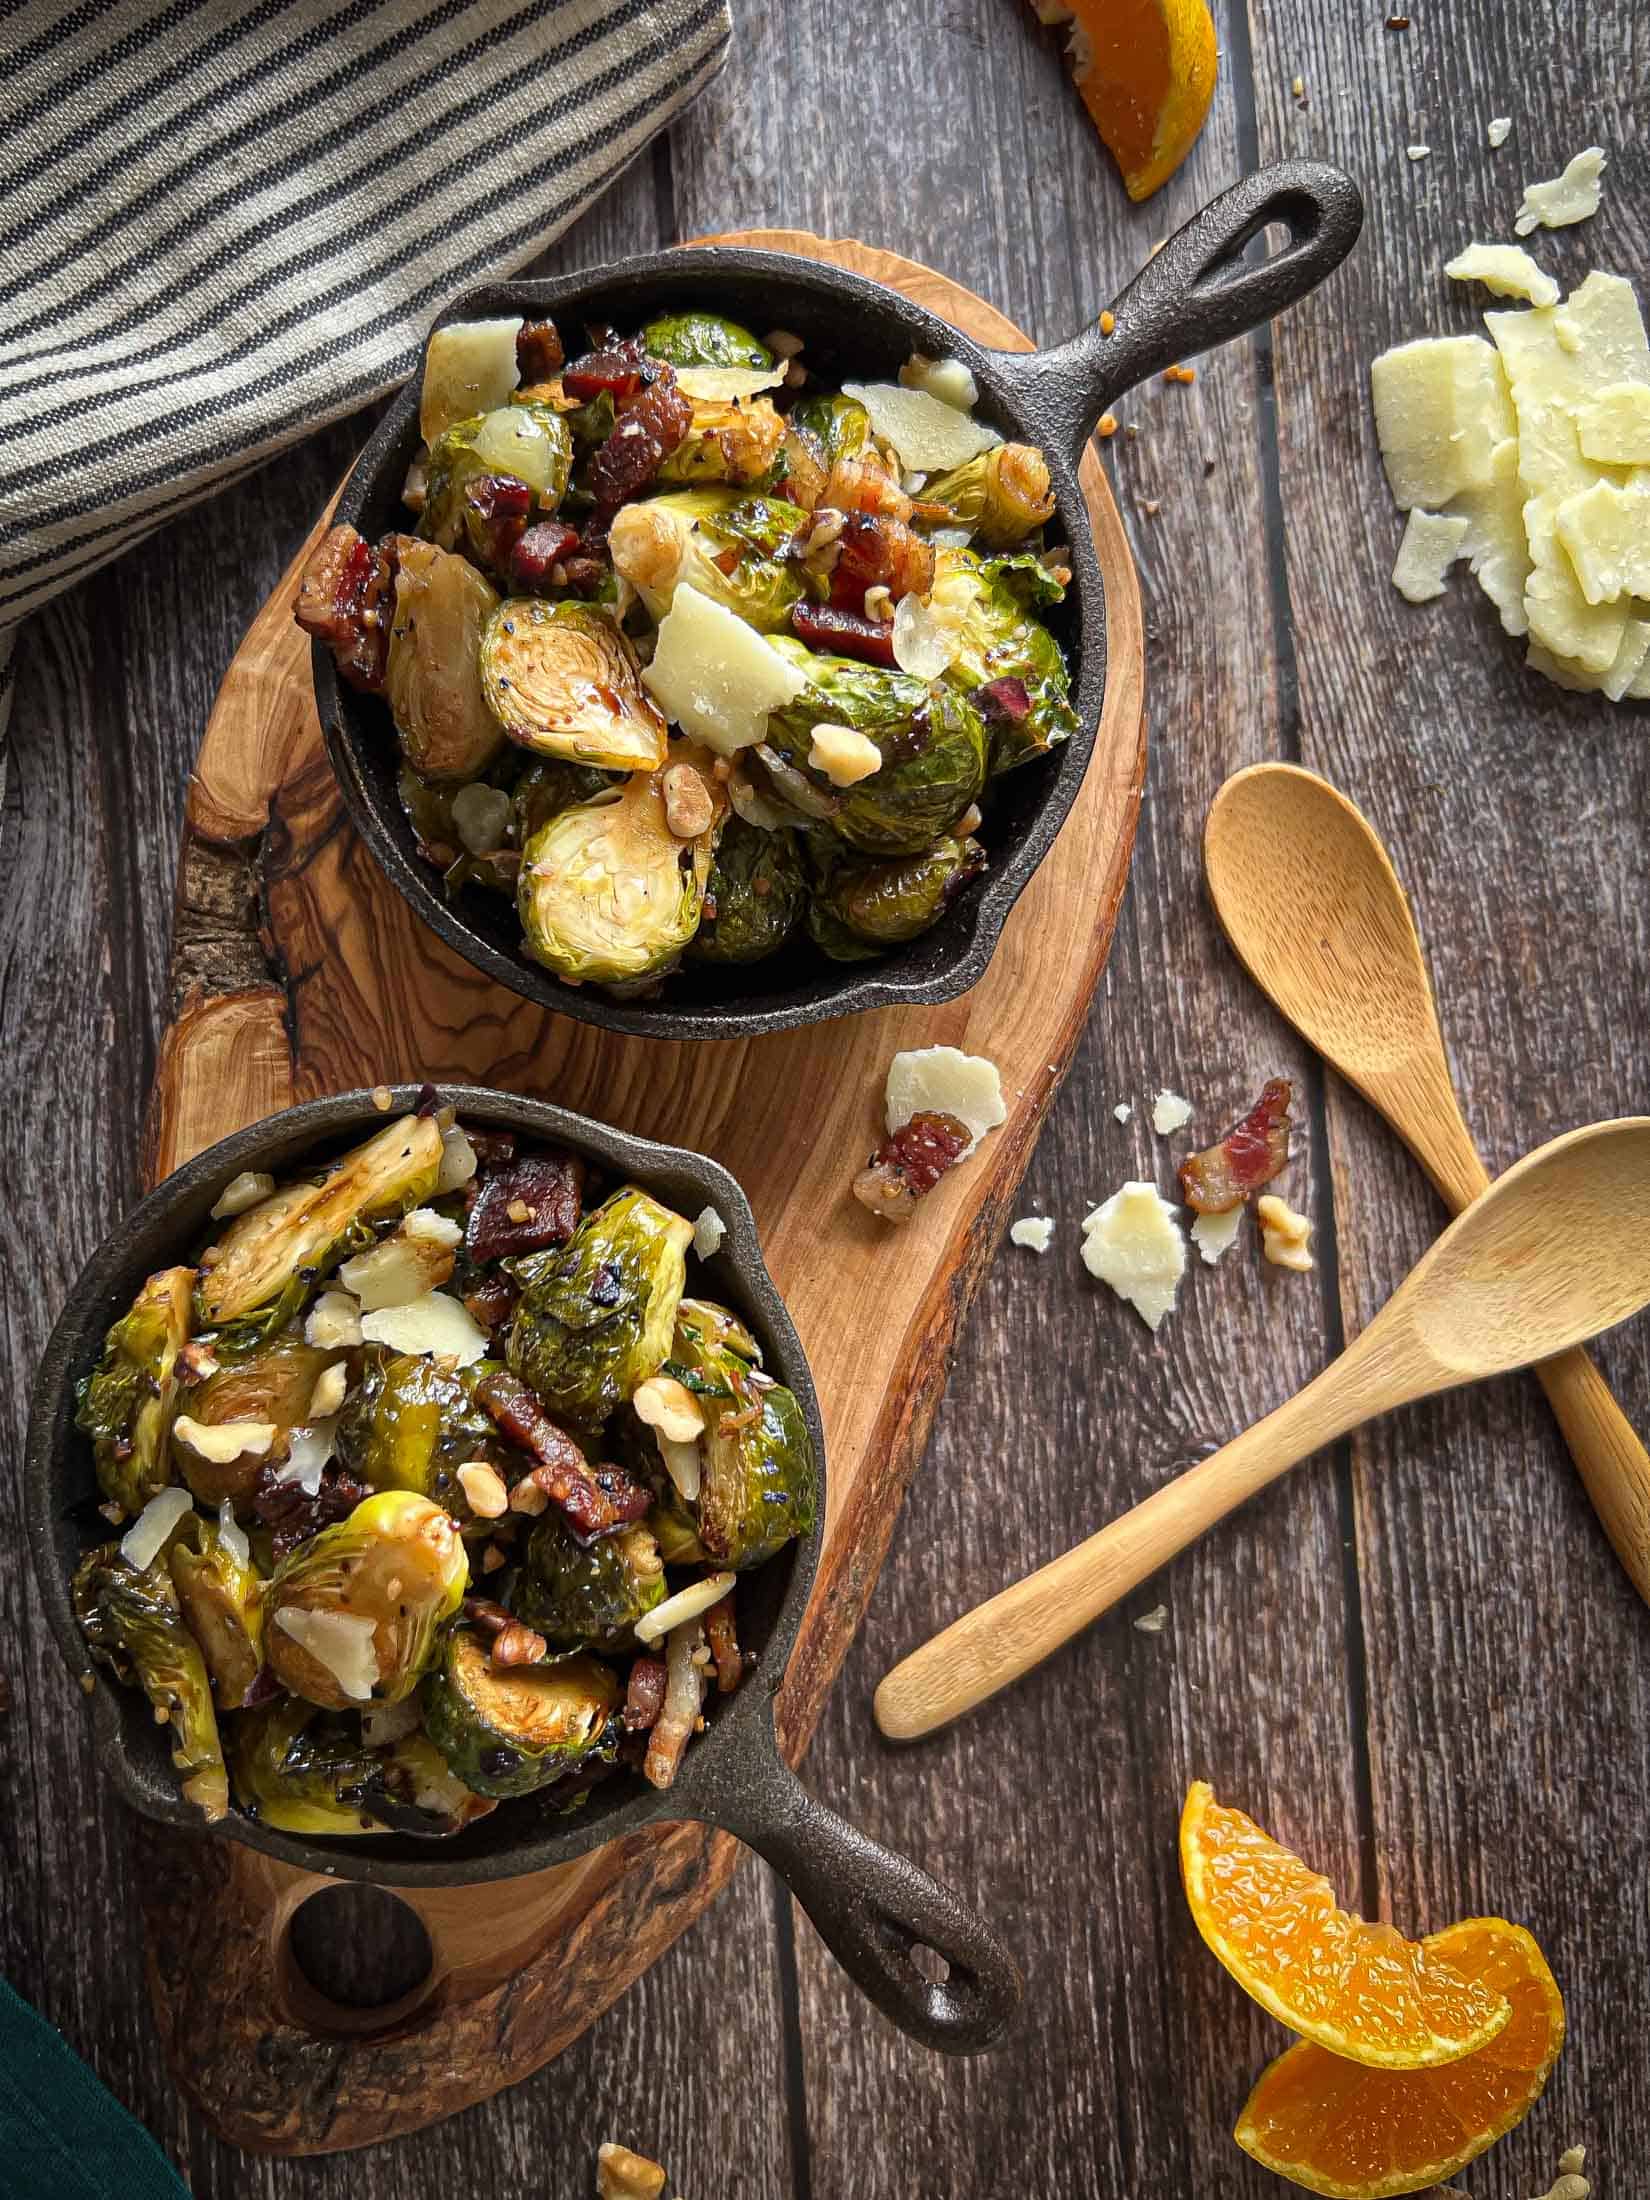 Two small cast iron skillets filled with smoked brussels sprouts with parmesan, oranges, and bacon in the foreground.